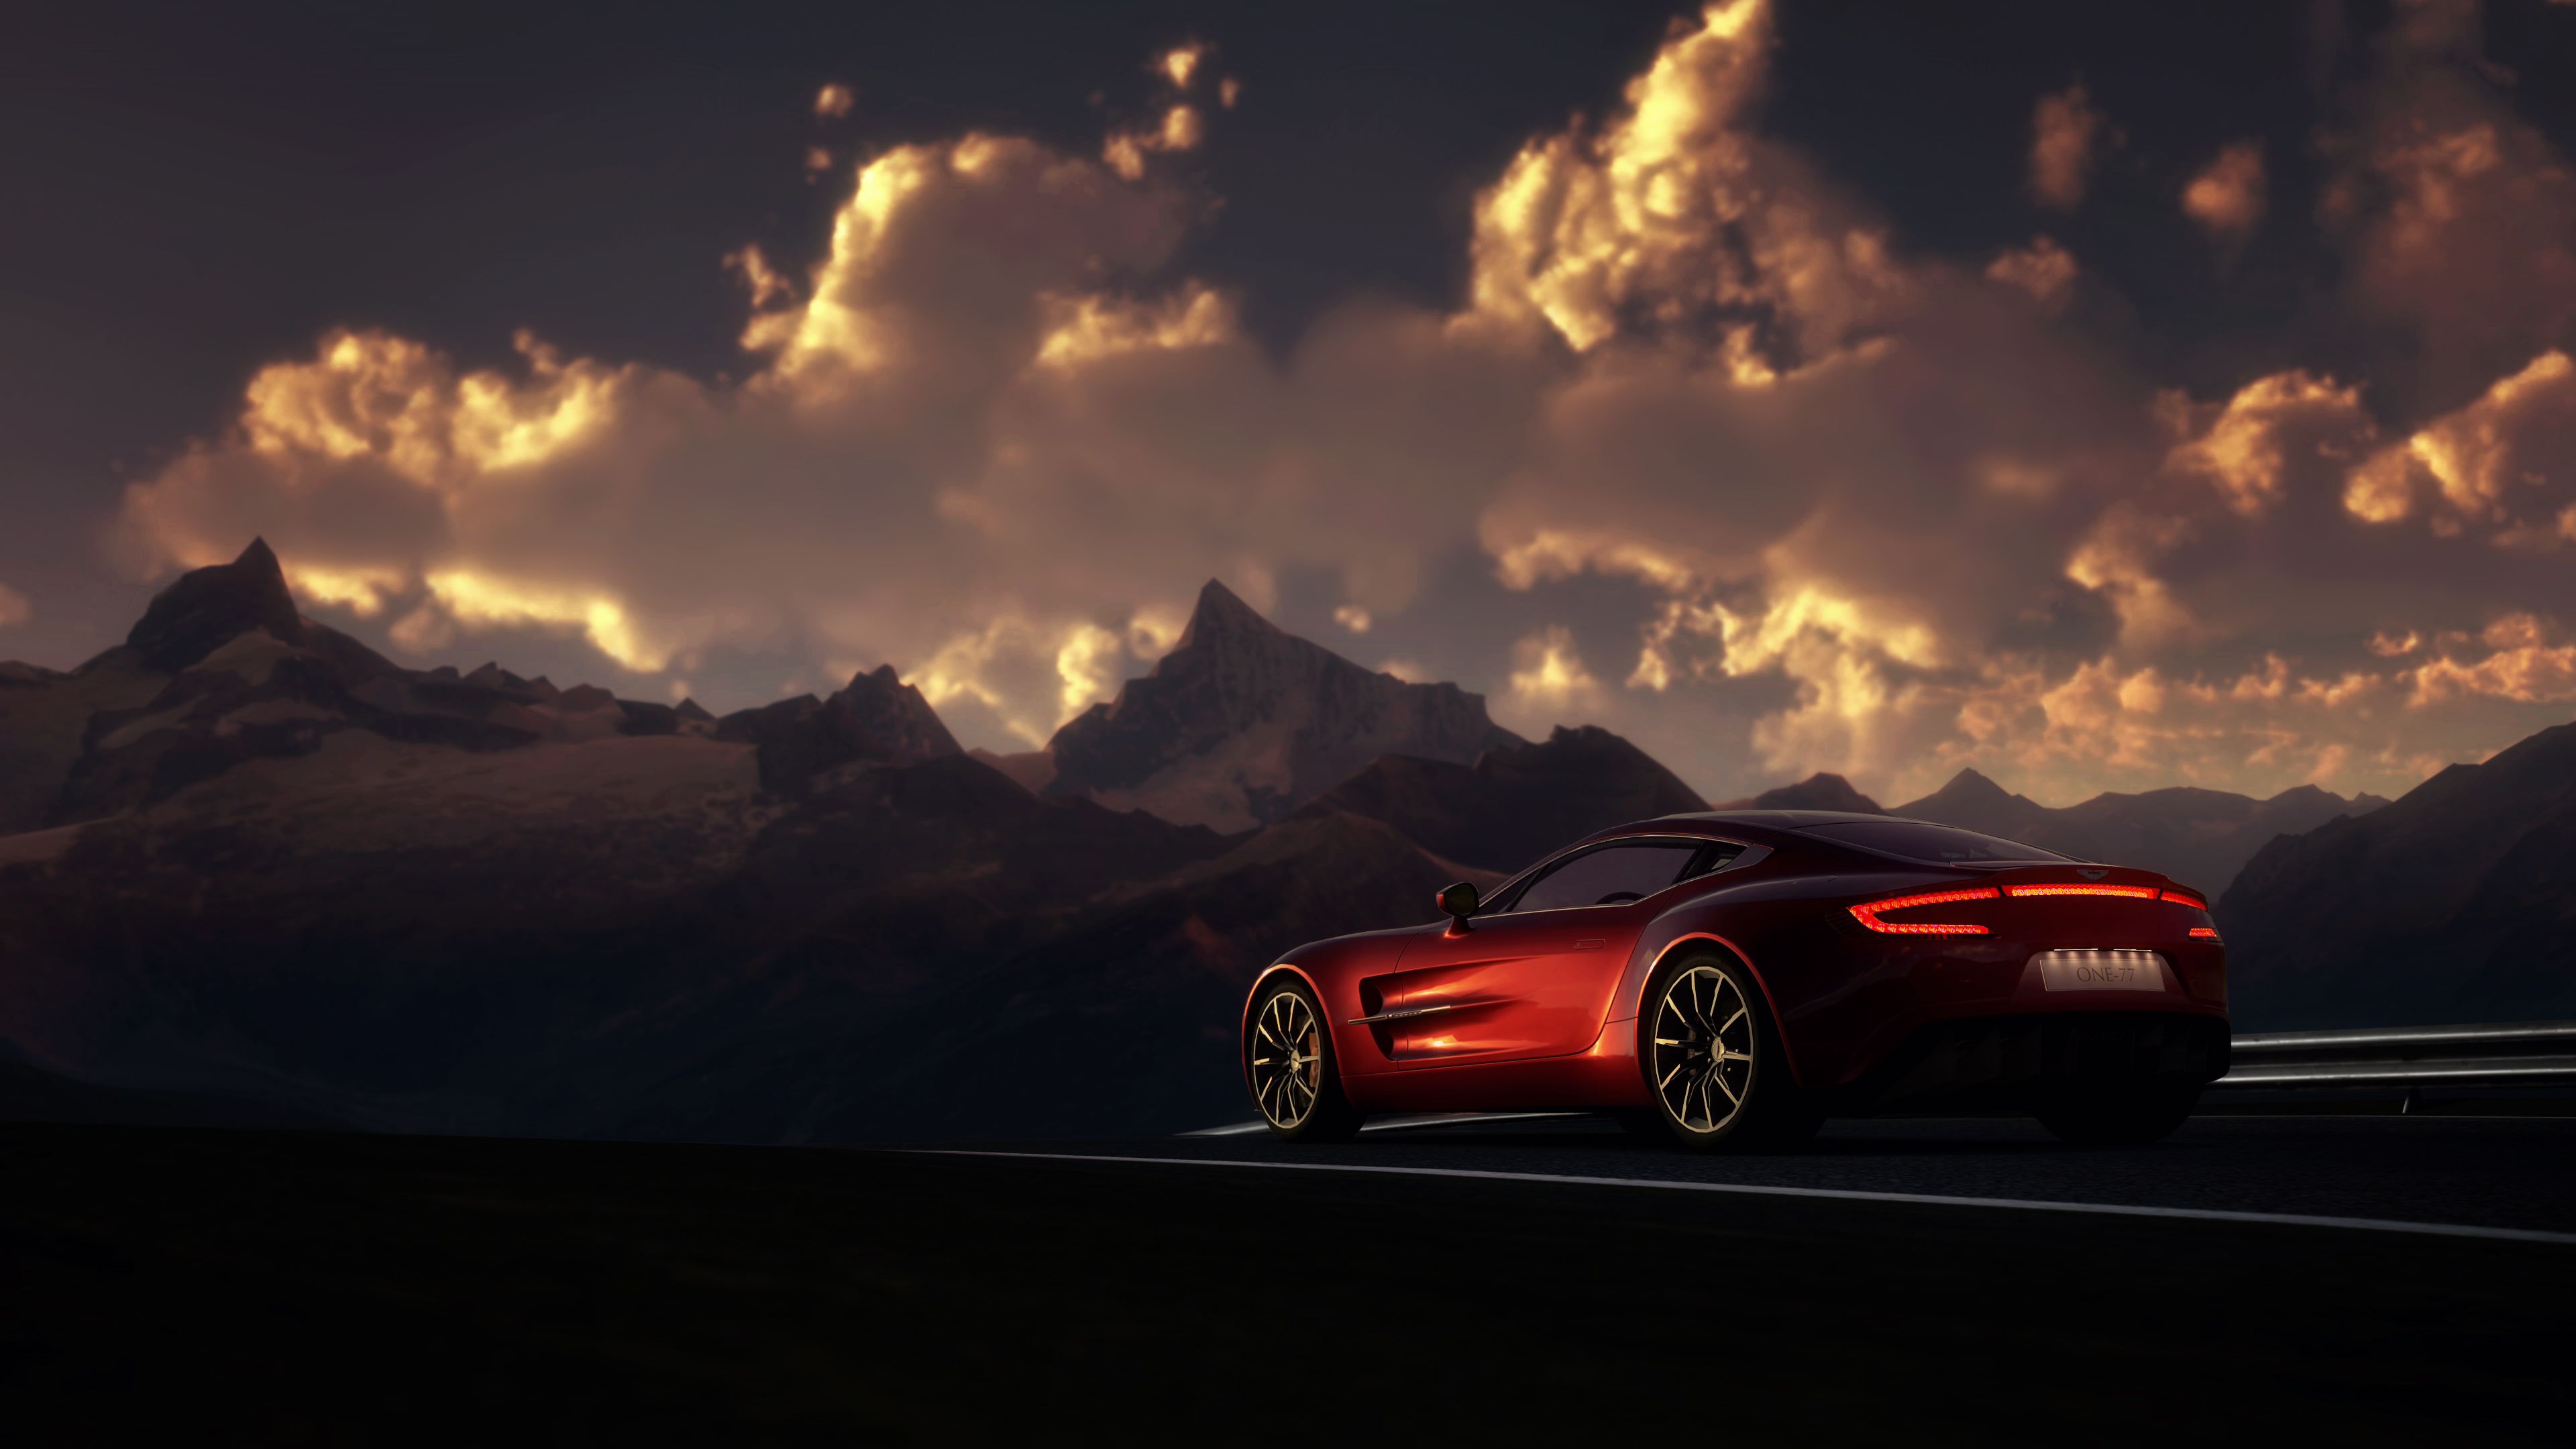 Aston Martin One 77 Gran Turismo 6 1440P Resolution HD 4k Wallpaper, Image, Background, Photo and Picture